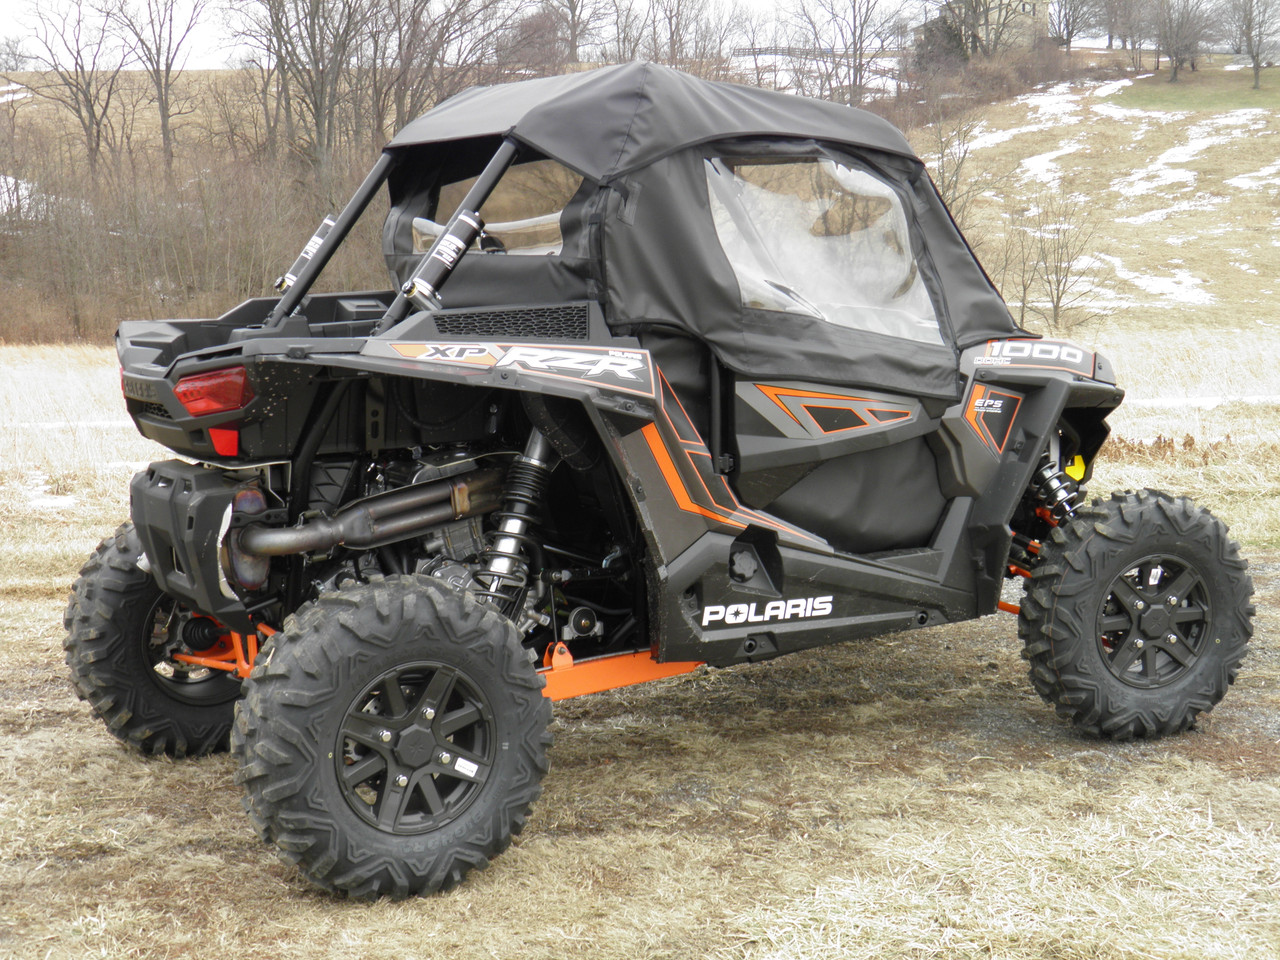 Polaris RZR 900/1000 Soft Back Panel rear and side angle view